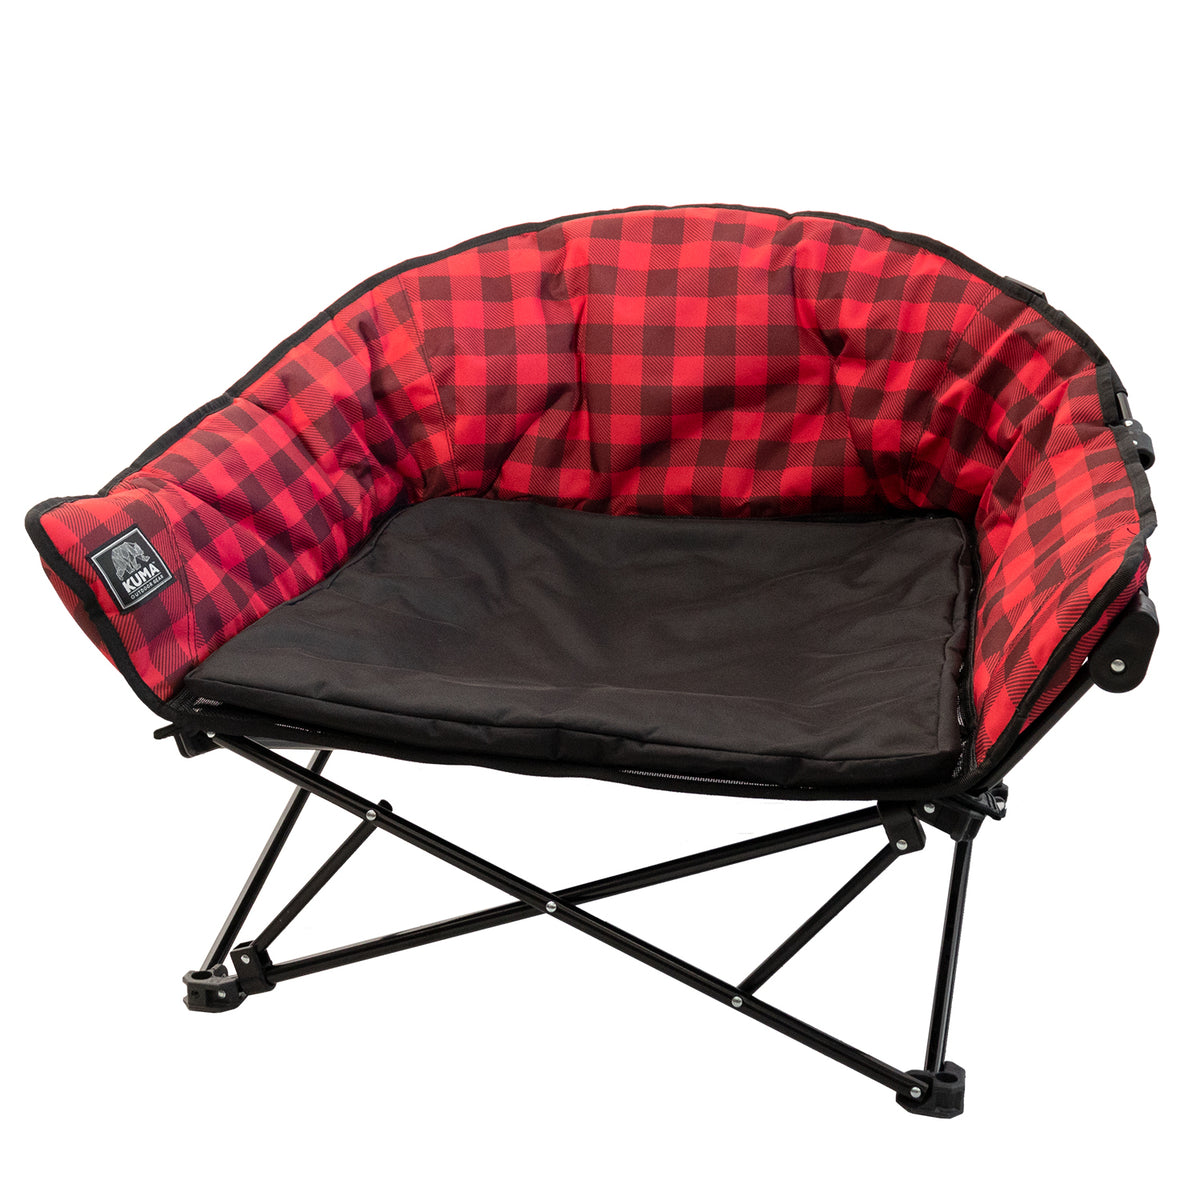 Dog bed, Red plaid